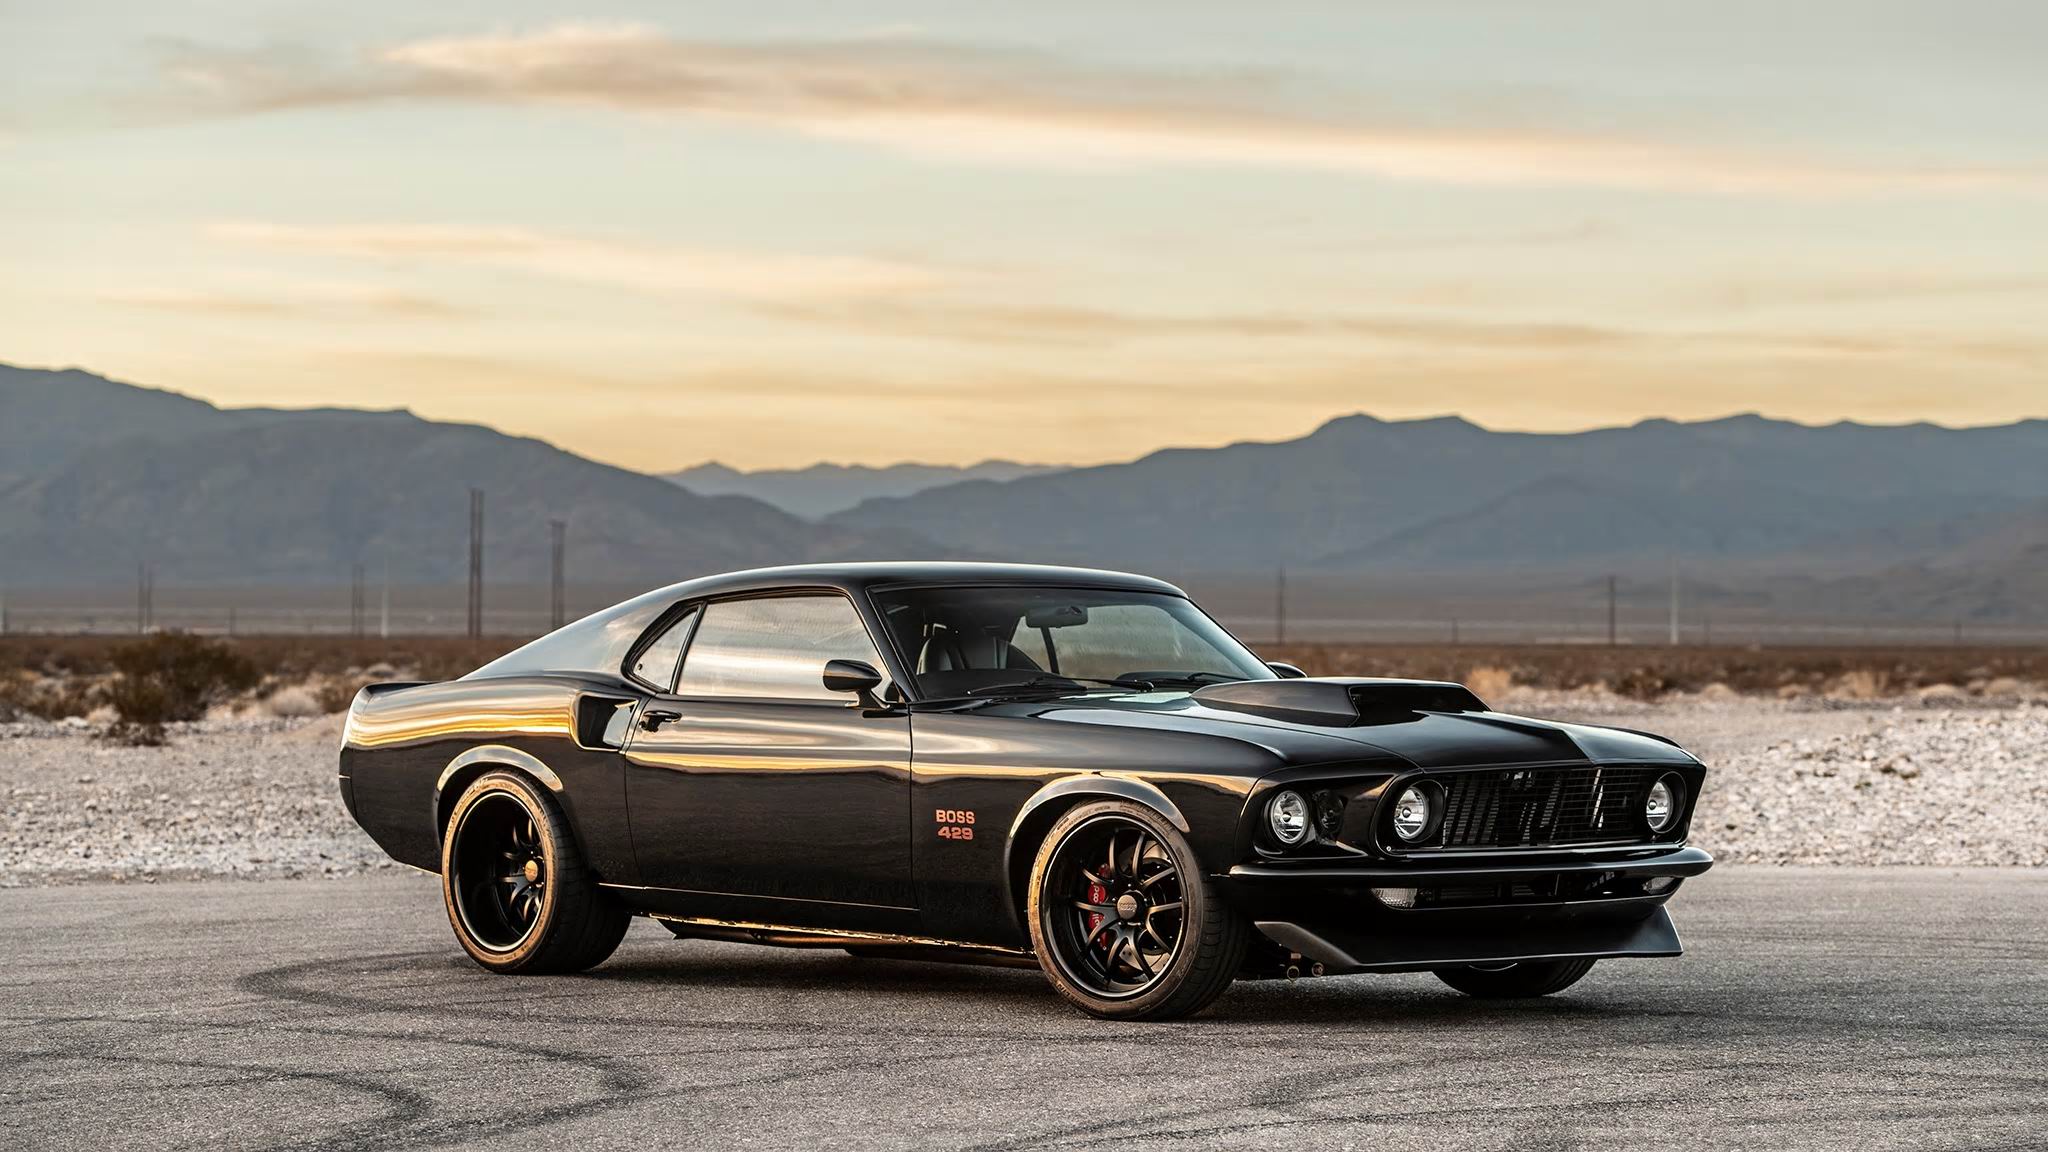 1969 Ford Mustang Boss 429 Hd Wallpaper Background Image 48x1152 Id Wallpaper Abyss